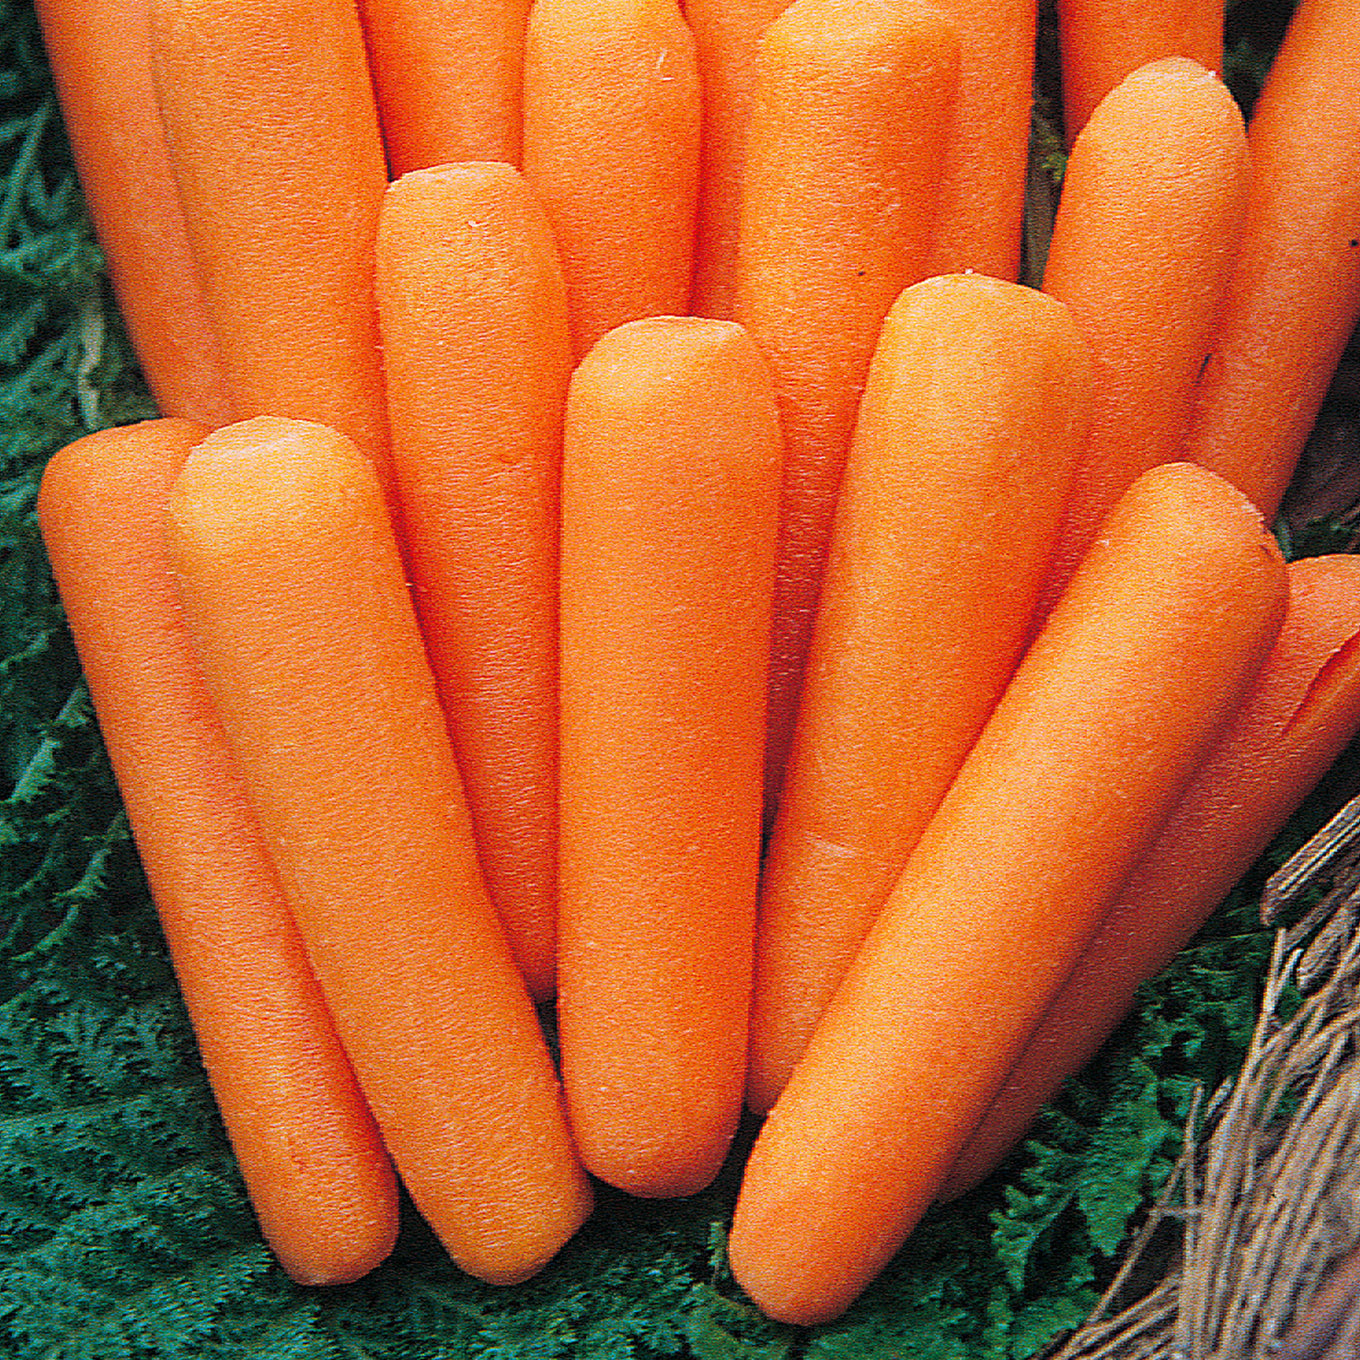 Mezza Lunga Nantese Carrot seeds fully matured and harvested, ready for eating!